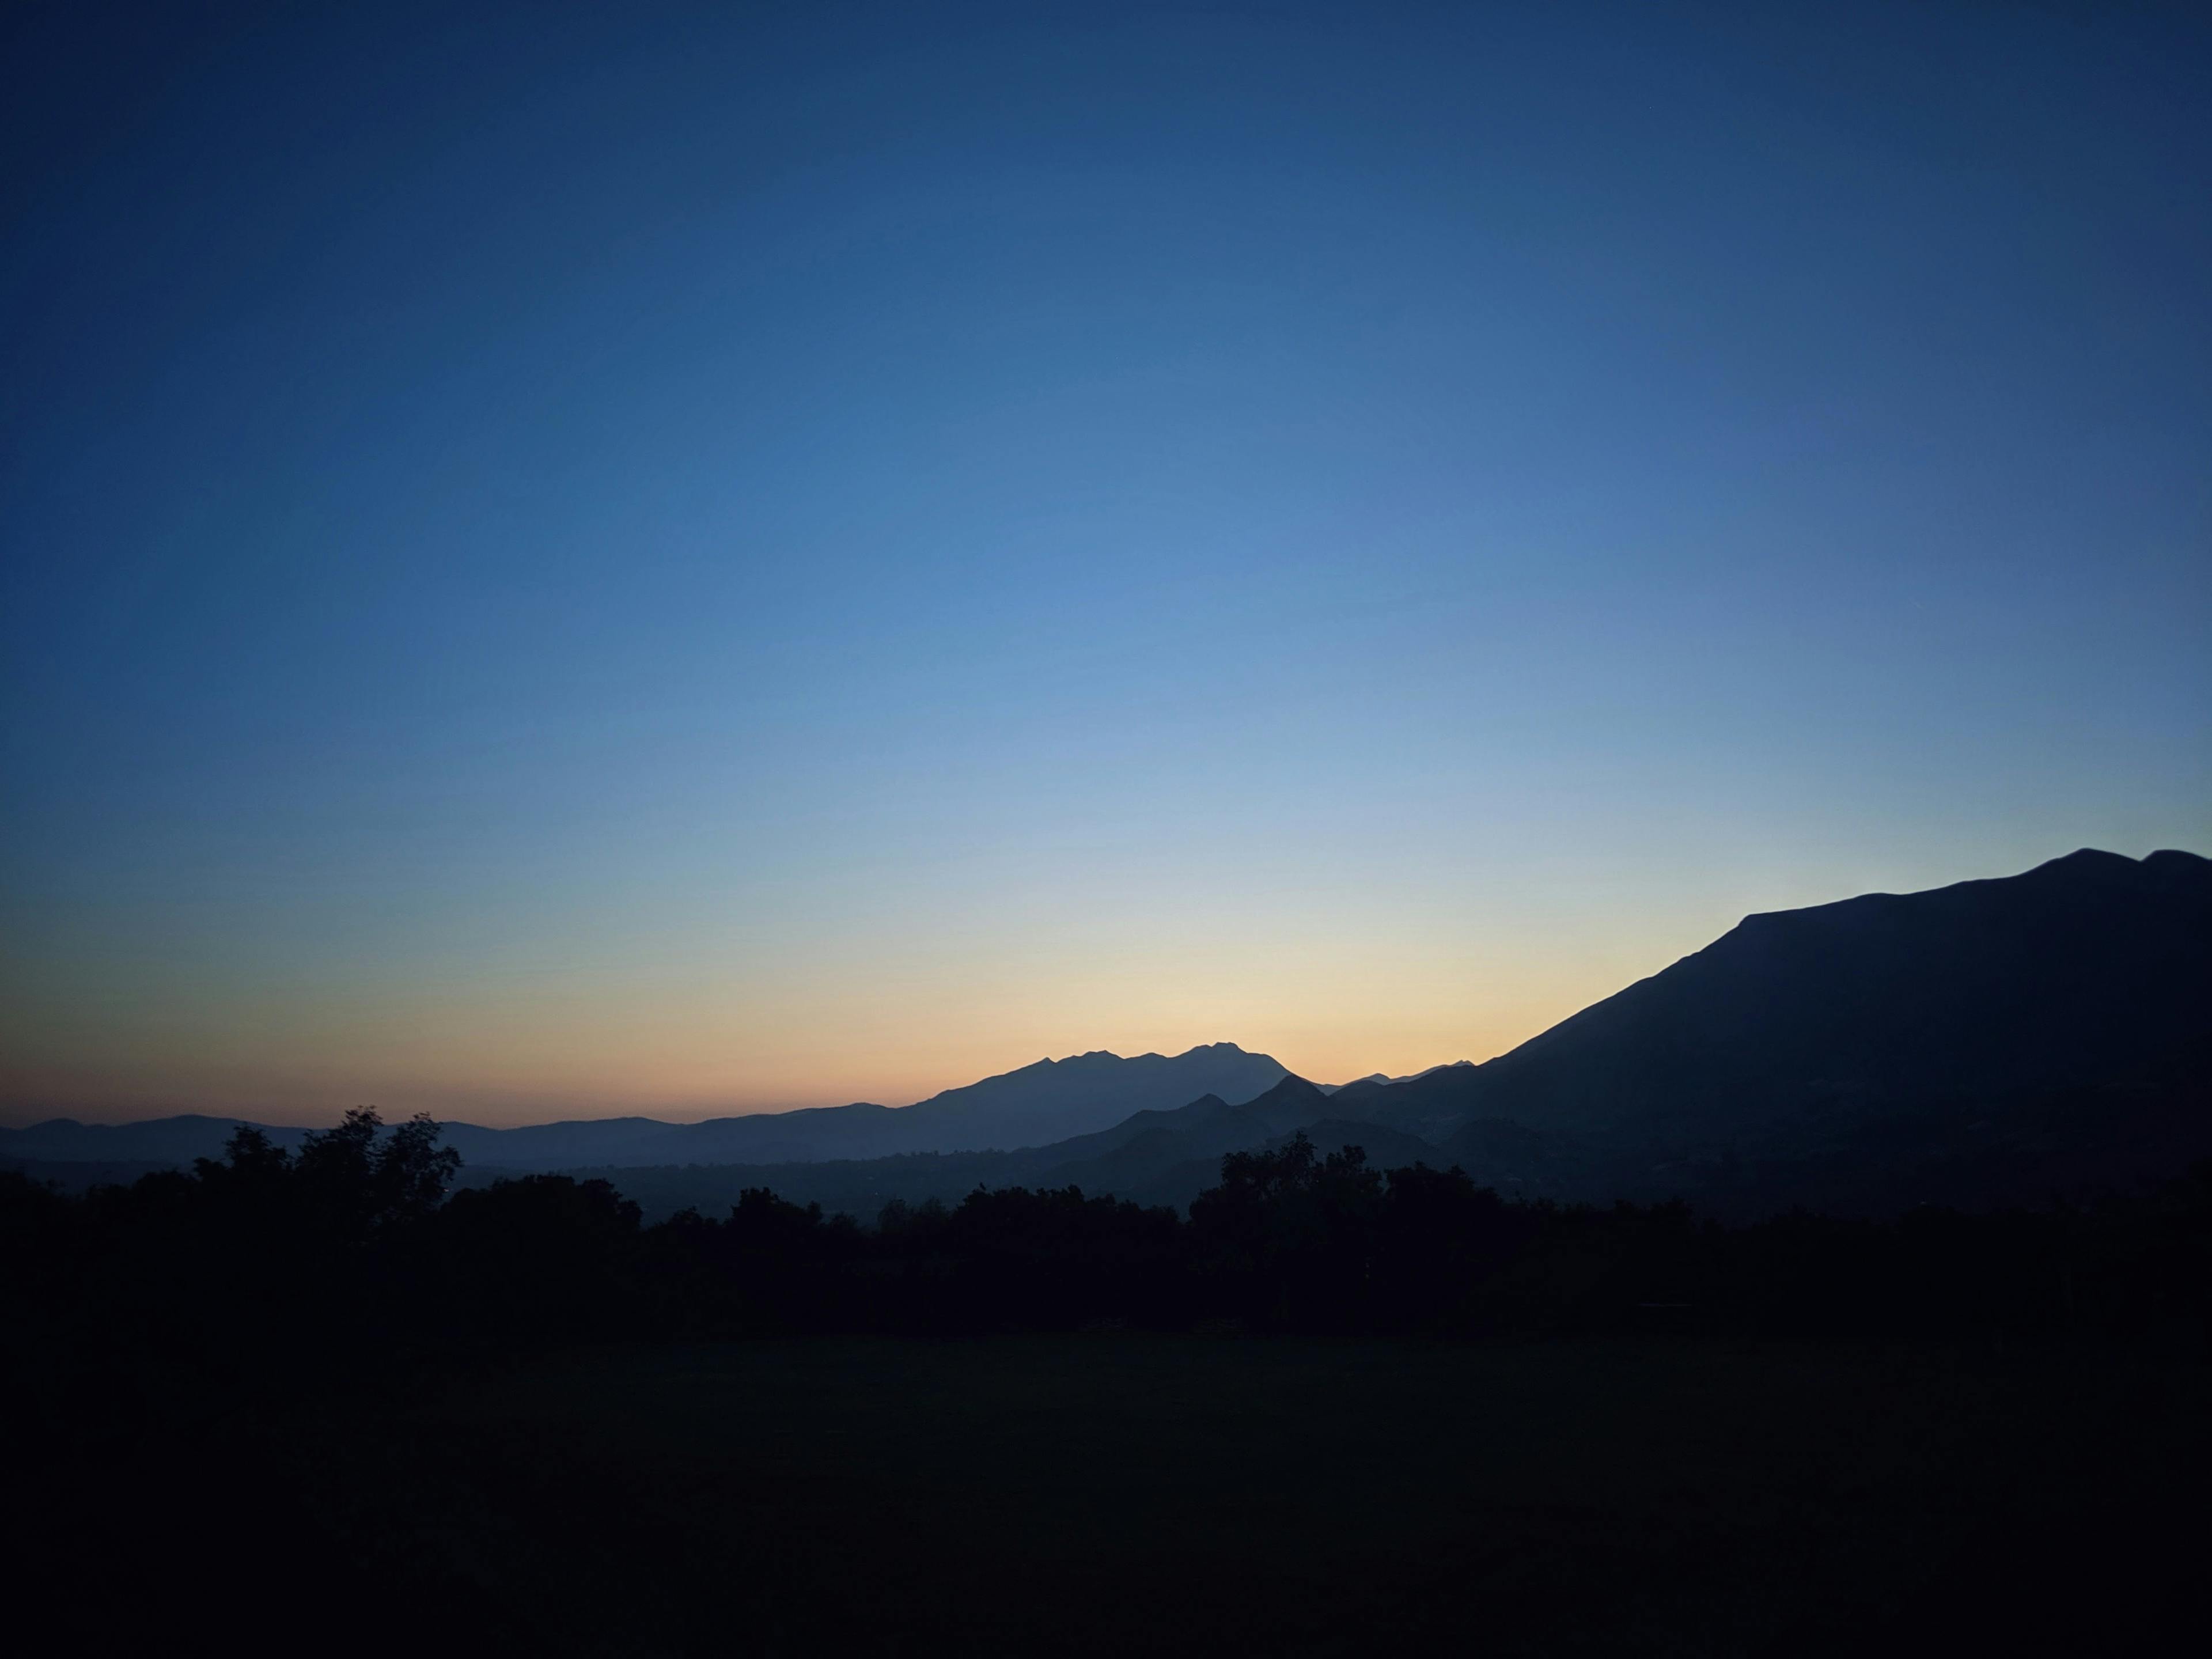 Mountains silhouetted at dusk in Ojai, California